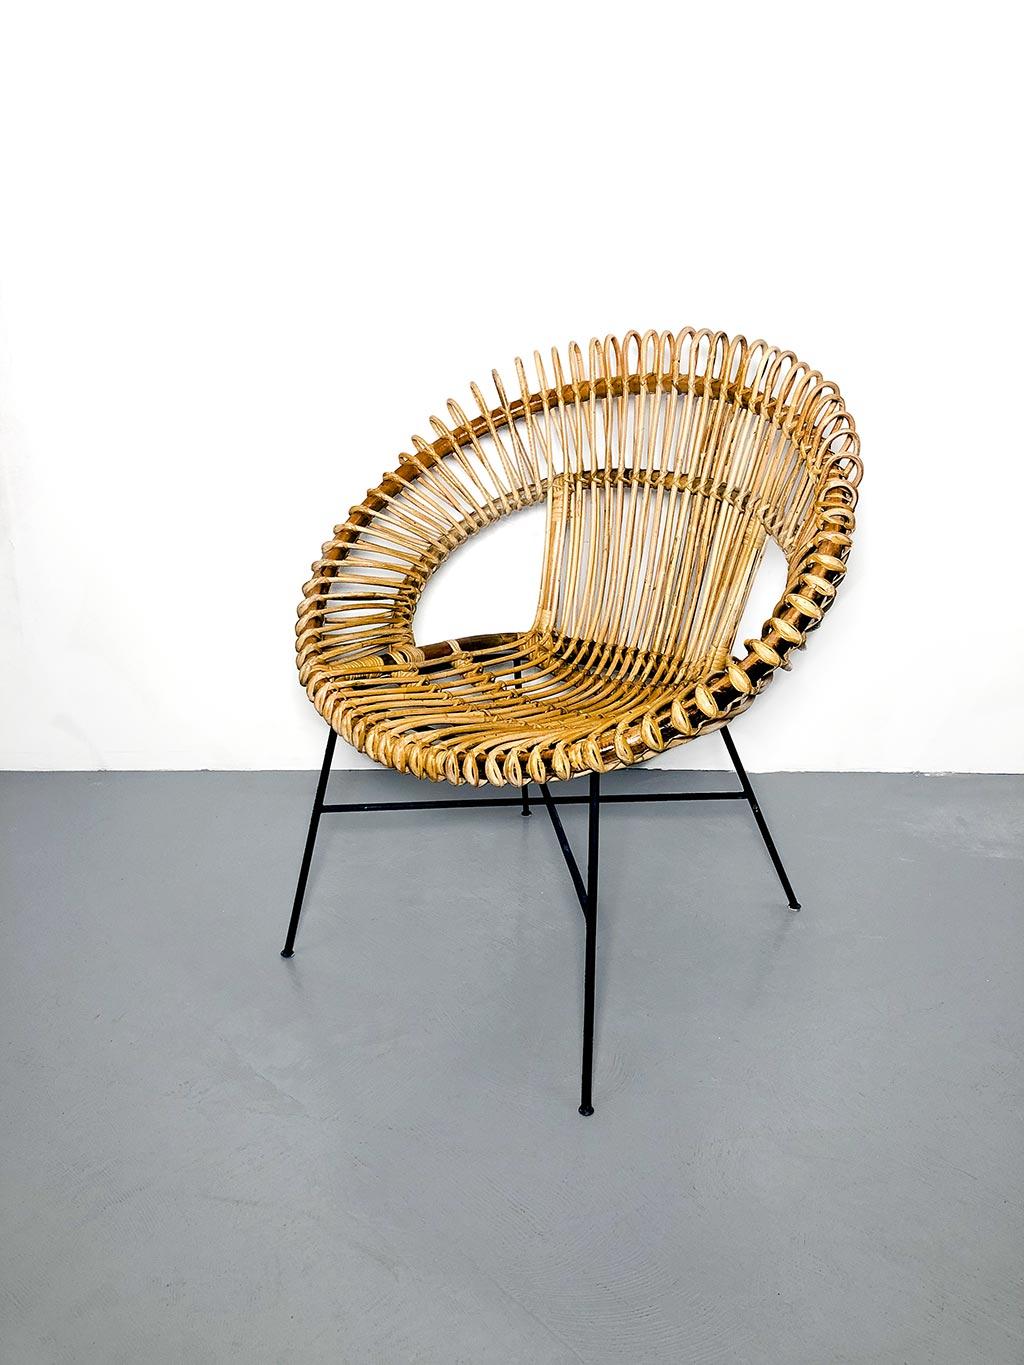 1960s Italian wicker armchair. Painted iron rod frame, seat made of woven malacca, reed and guinea cane. The design and style are very reminiscent of Franco Albini and Franca Helg's chairs for Bonacina. Its condition is perfect; it has some small